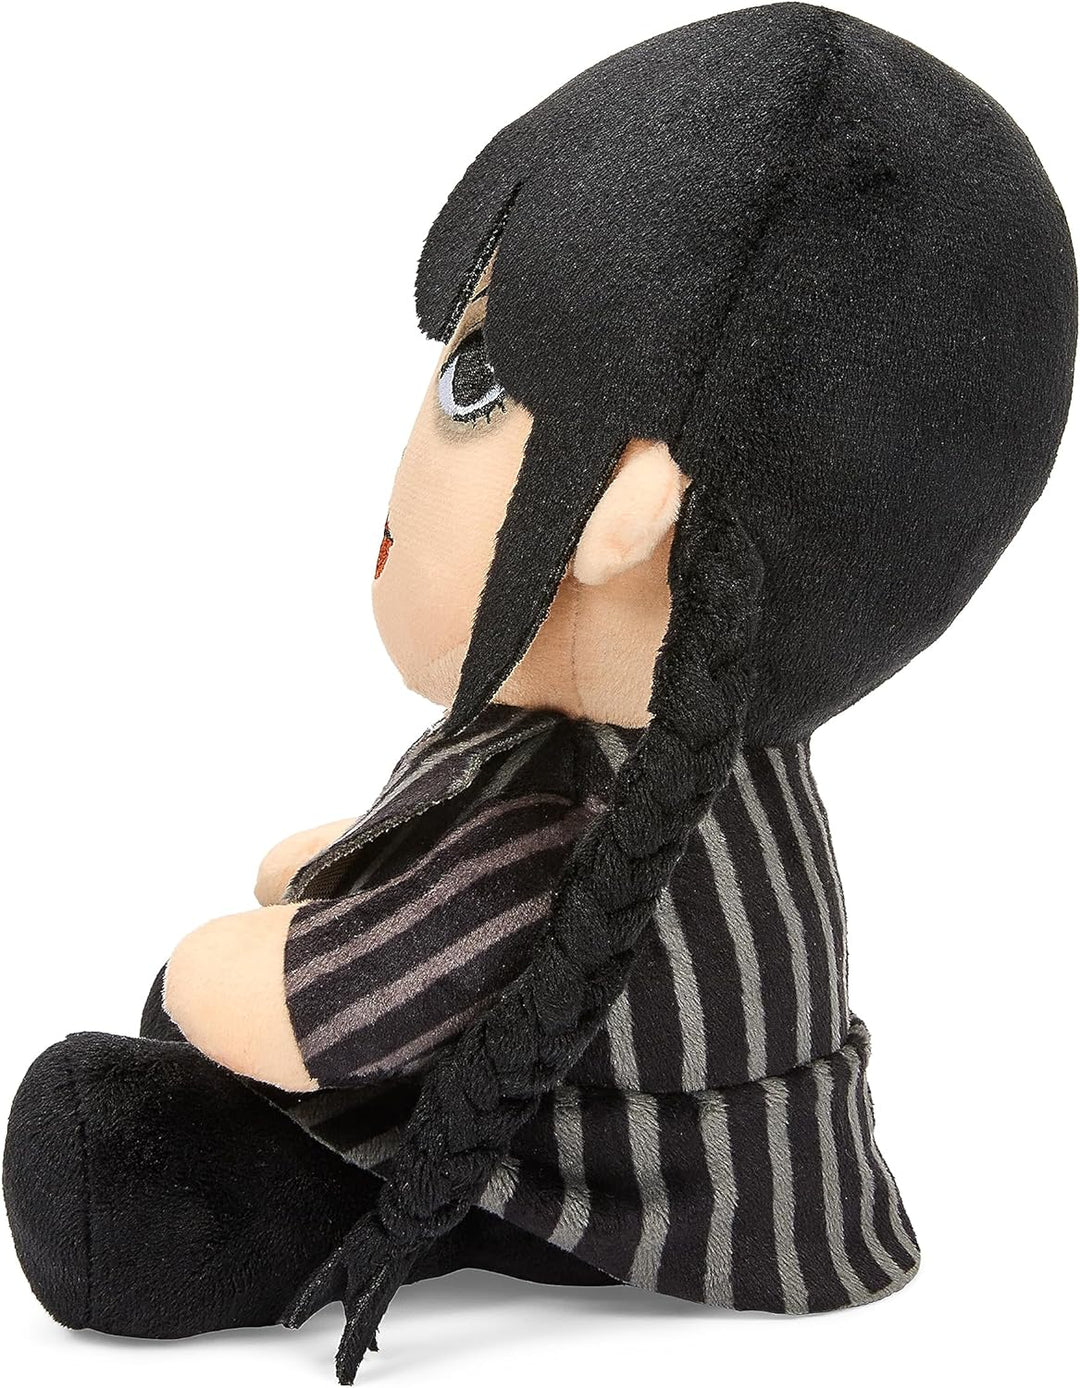 Official Wednesday Addams 8" Plush